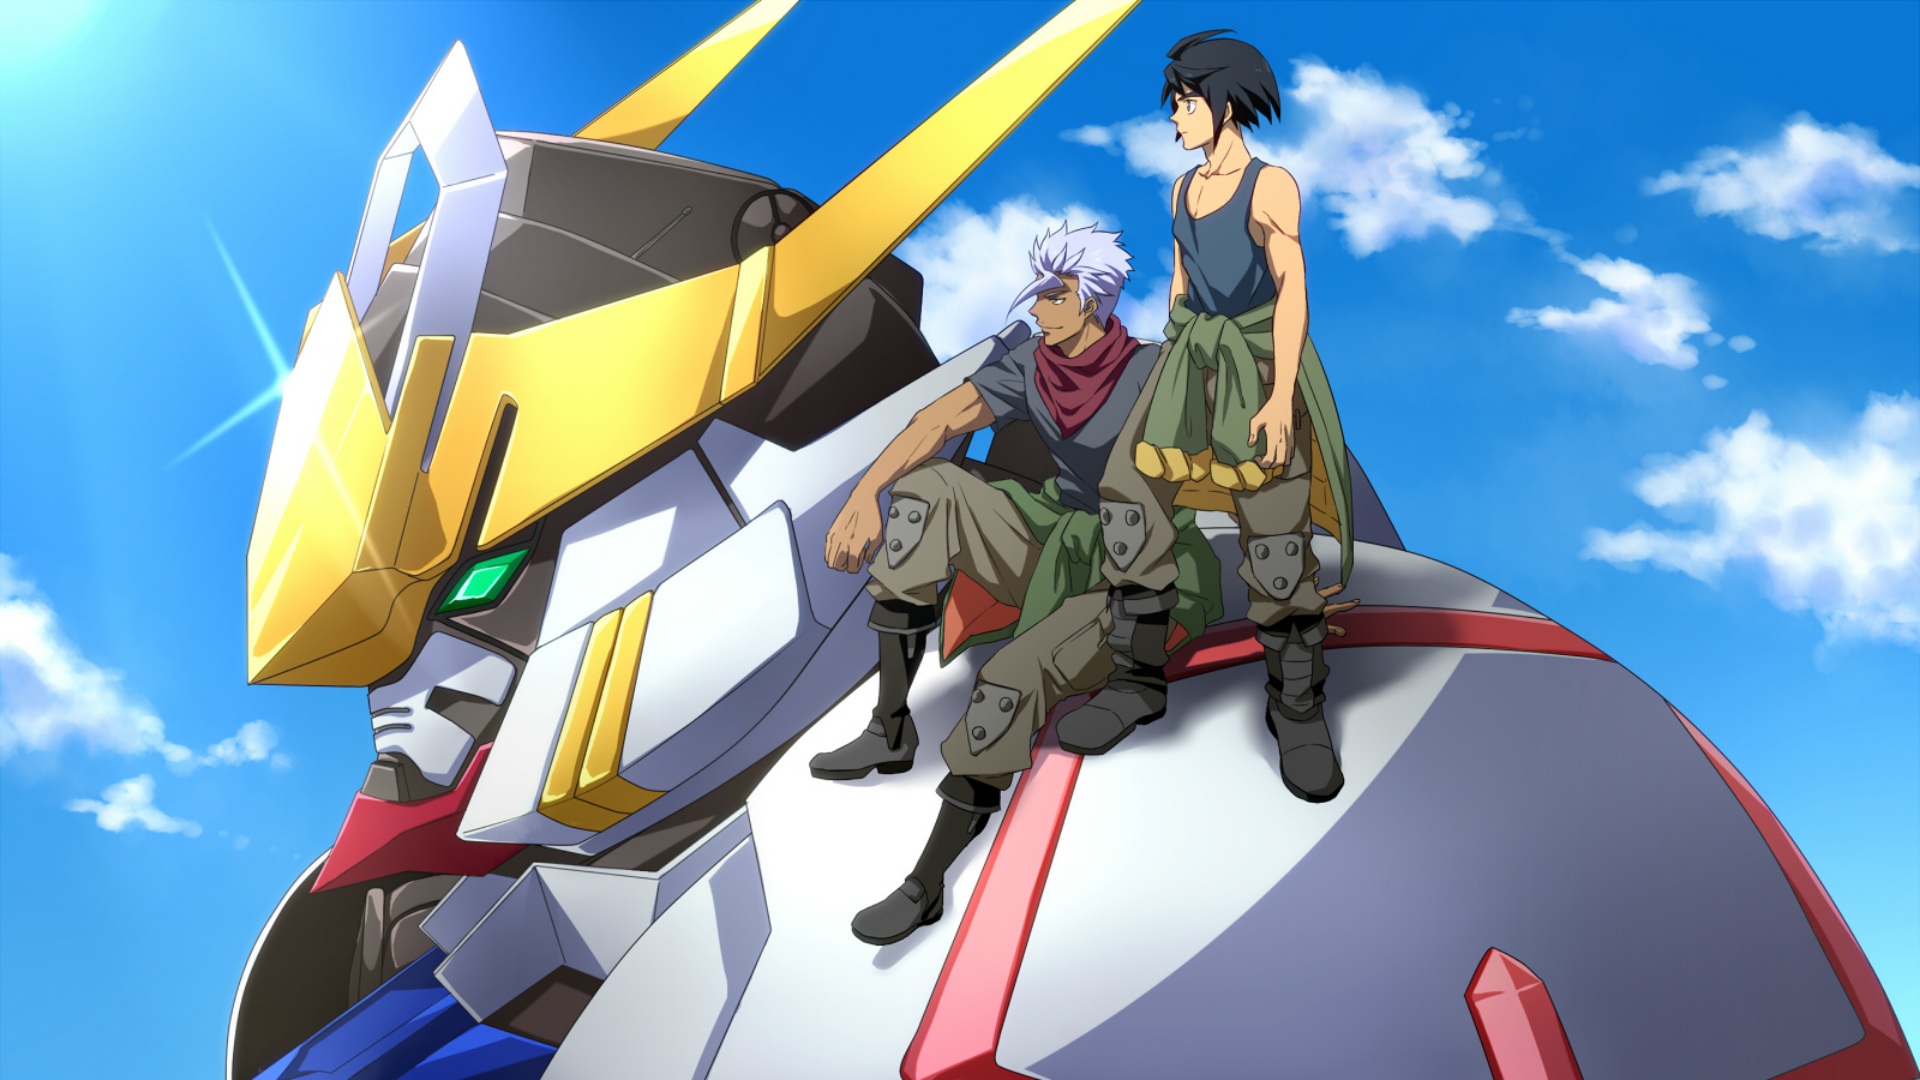 Mobile Suit Gundam Iron Blooded Orphans HD Wallpaper Background Image X